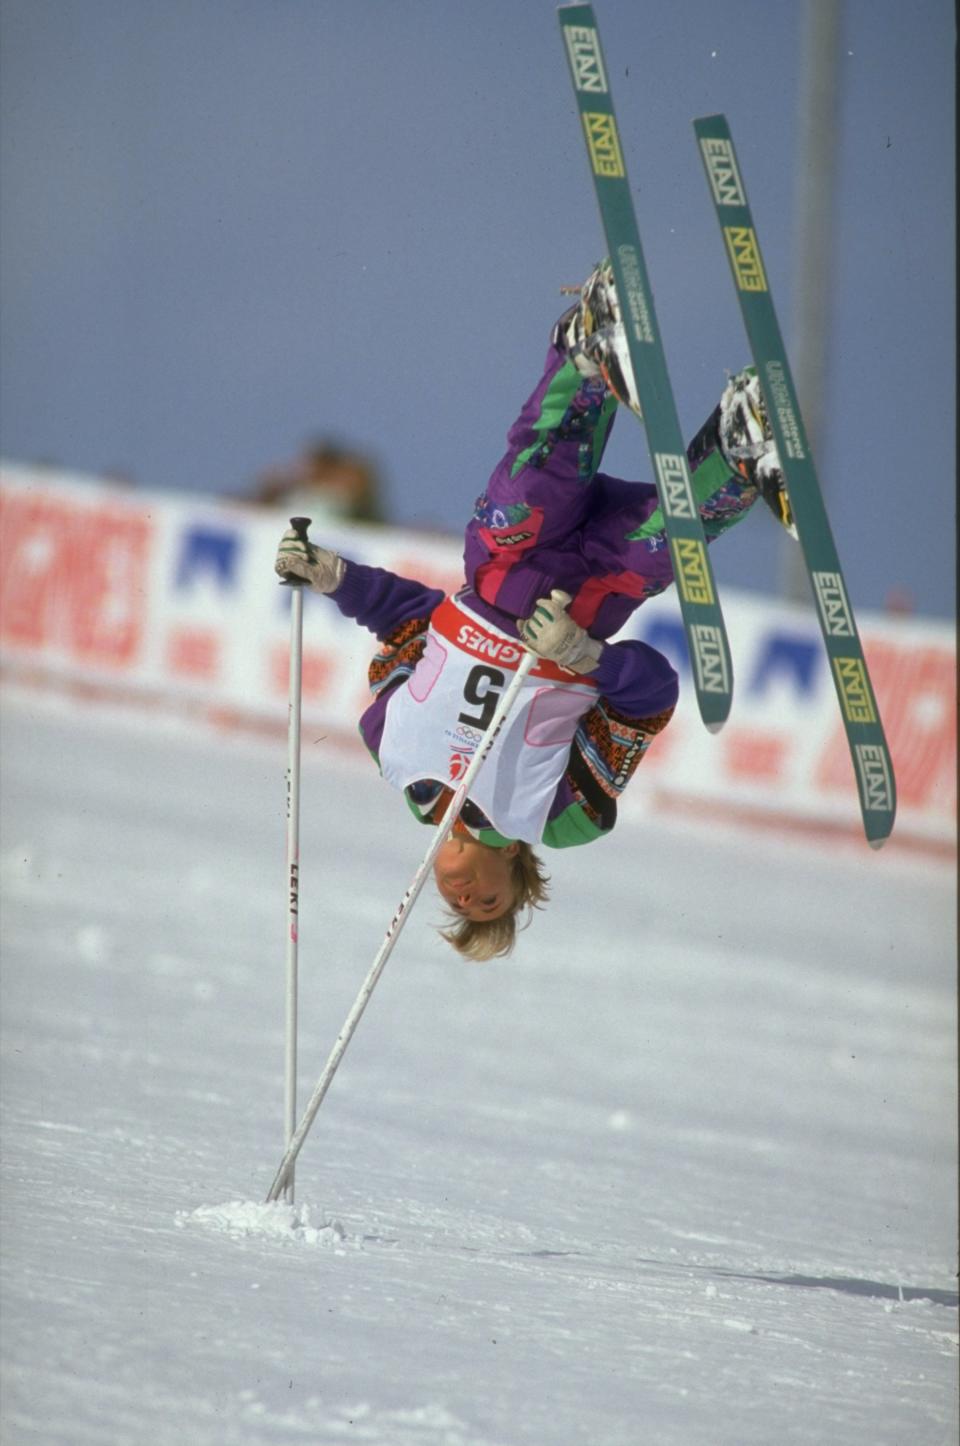 <p>A demo event at the ’88 Games in Calgary, Canada and the ’92 Games in Albertville, France, ski ballet is best described as figure skating on skis. The event featured jumps, spins and even pole-assisted flips. Like skijoring, it never became an offcial event. (Getty) </p>